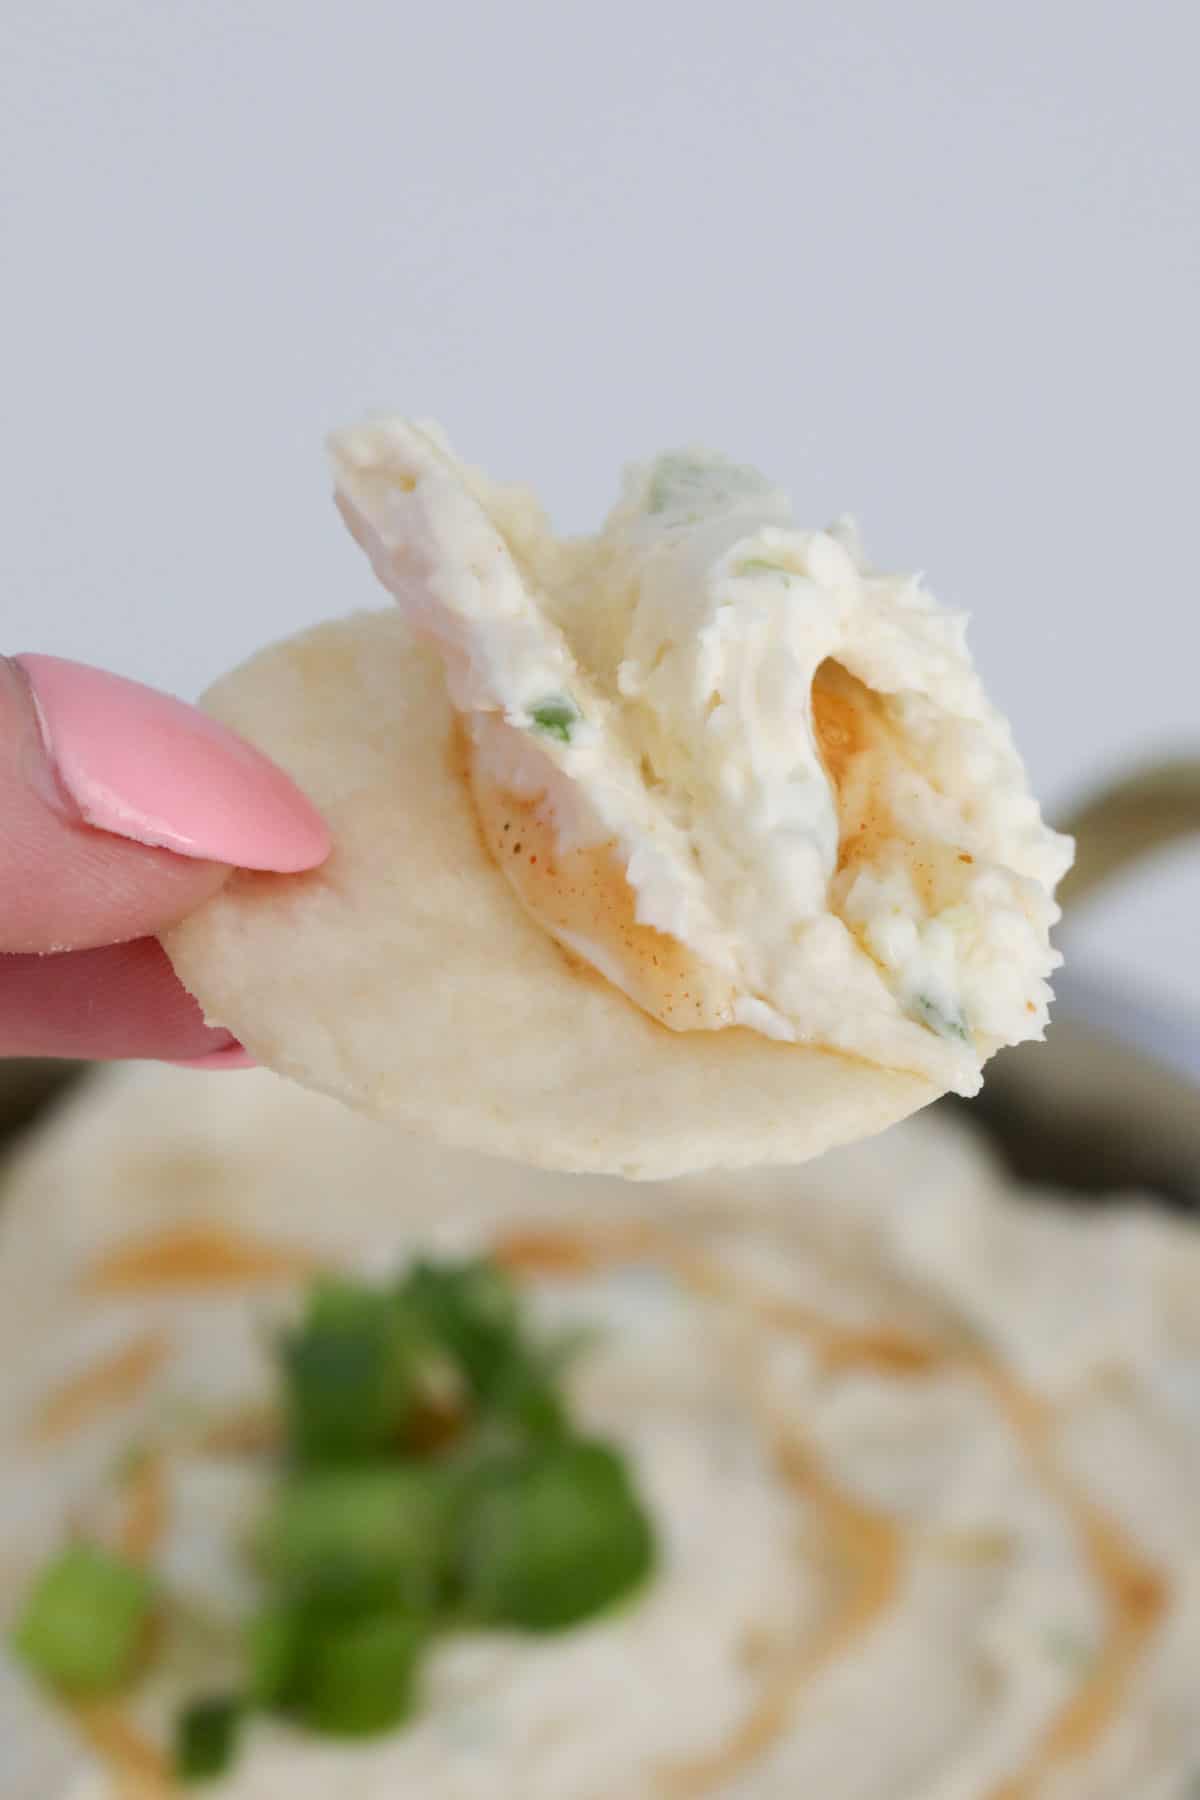 A hand holding a cracker with a creamy dip.